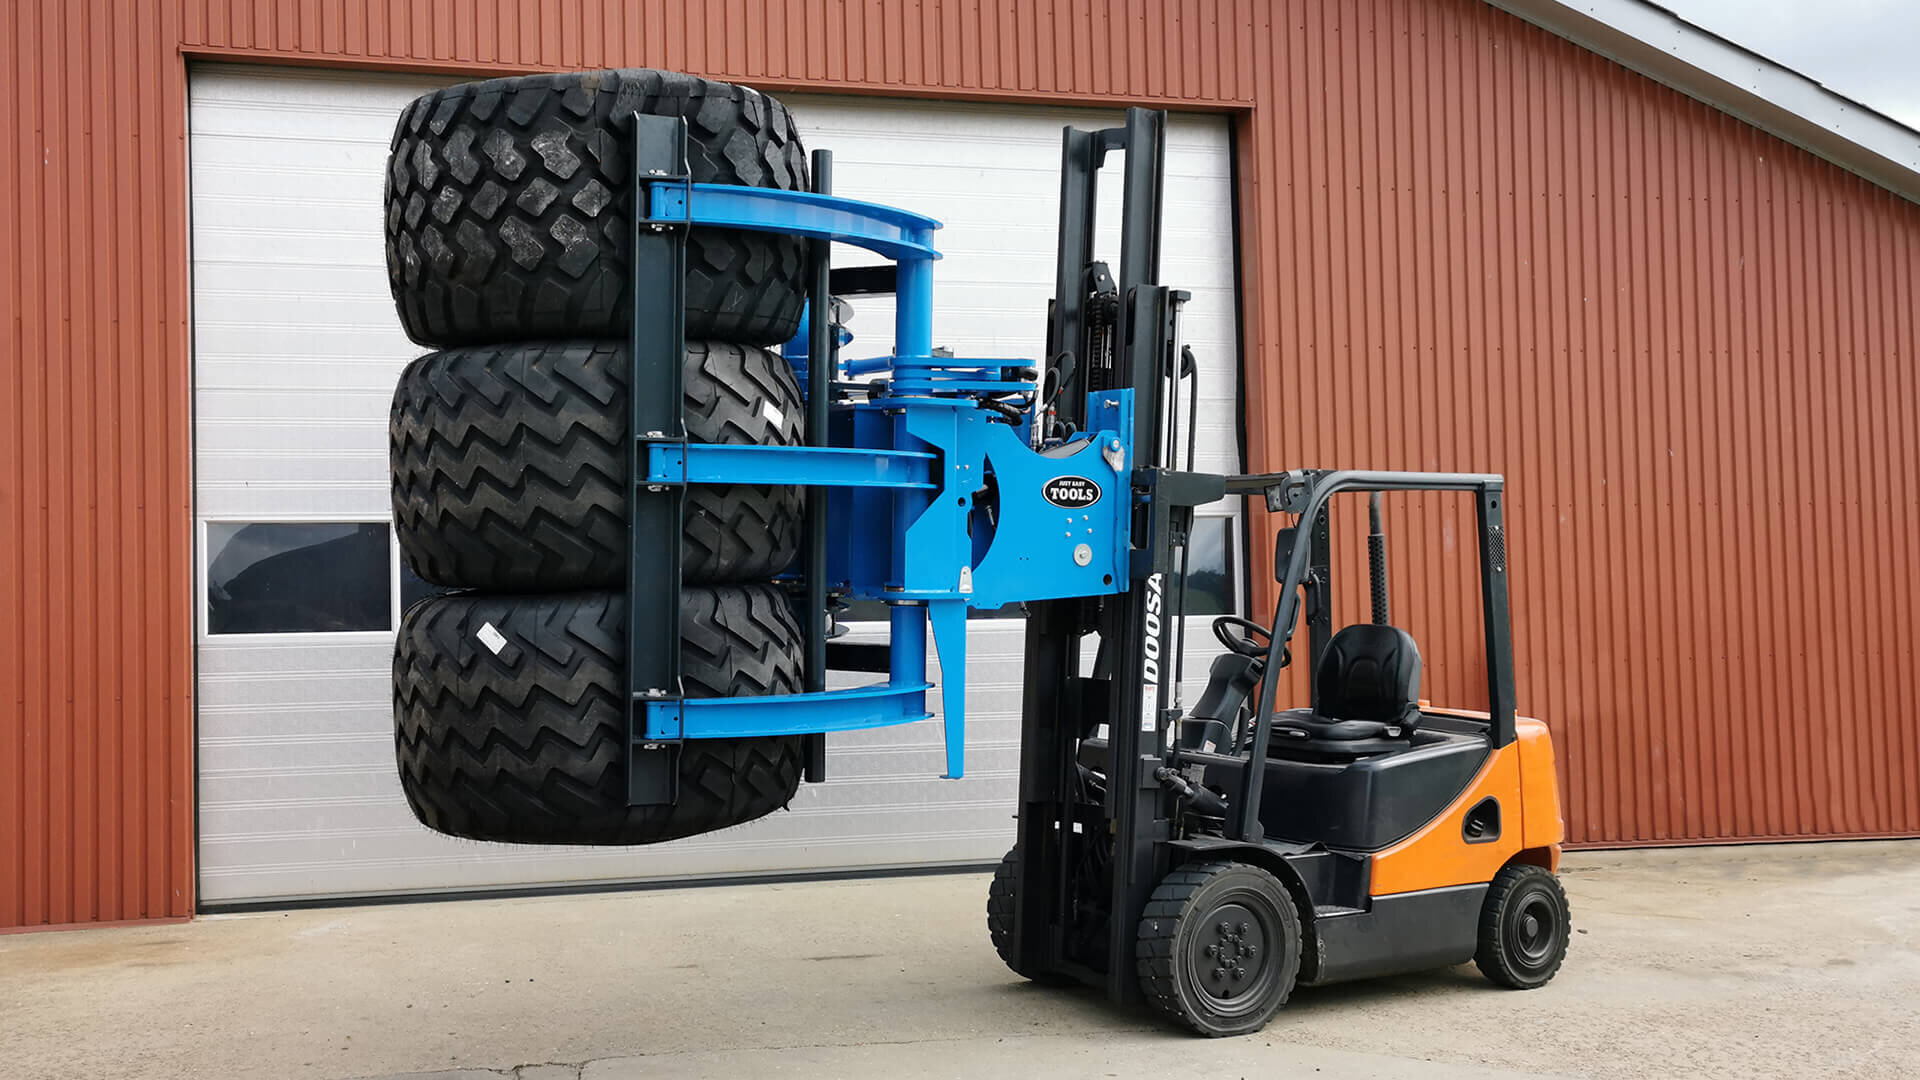 Easy Stacker 1600 - safe handling of stacks of small OTR and AGRO tyres